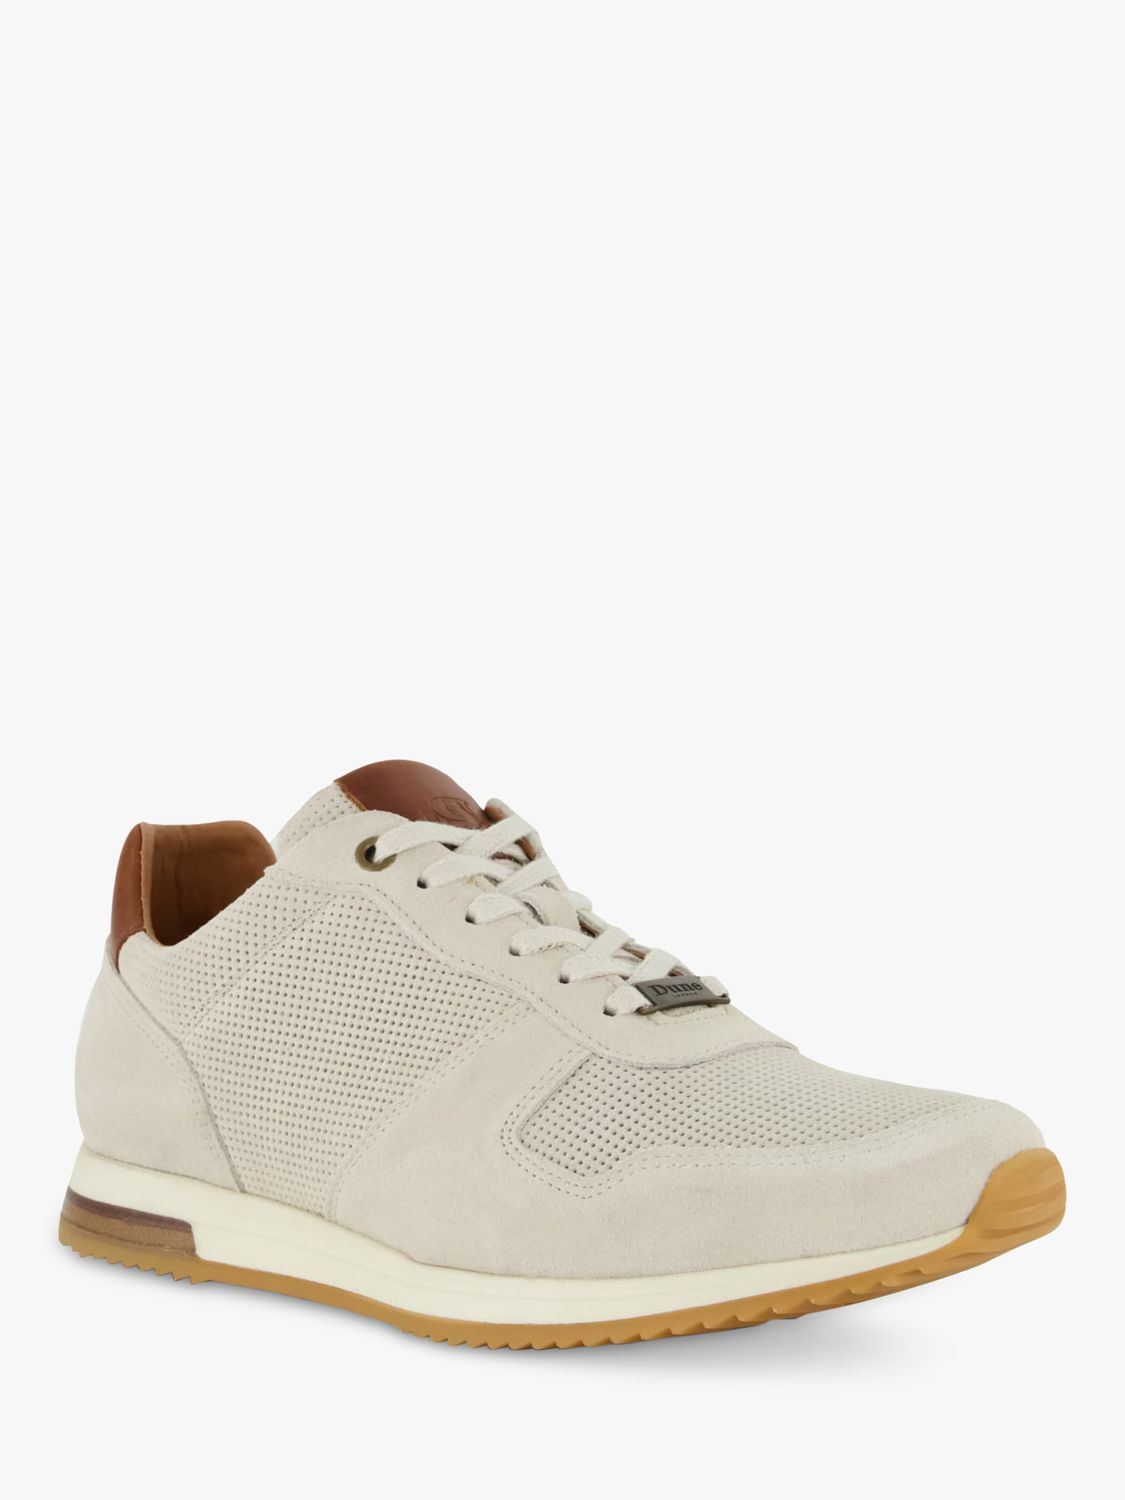 Dune Trilogy Suede Runner Trainers, Off White, EU43